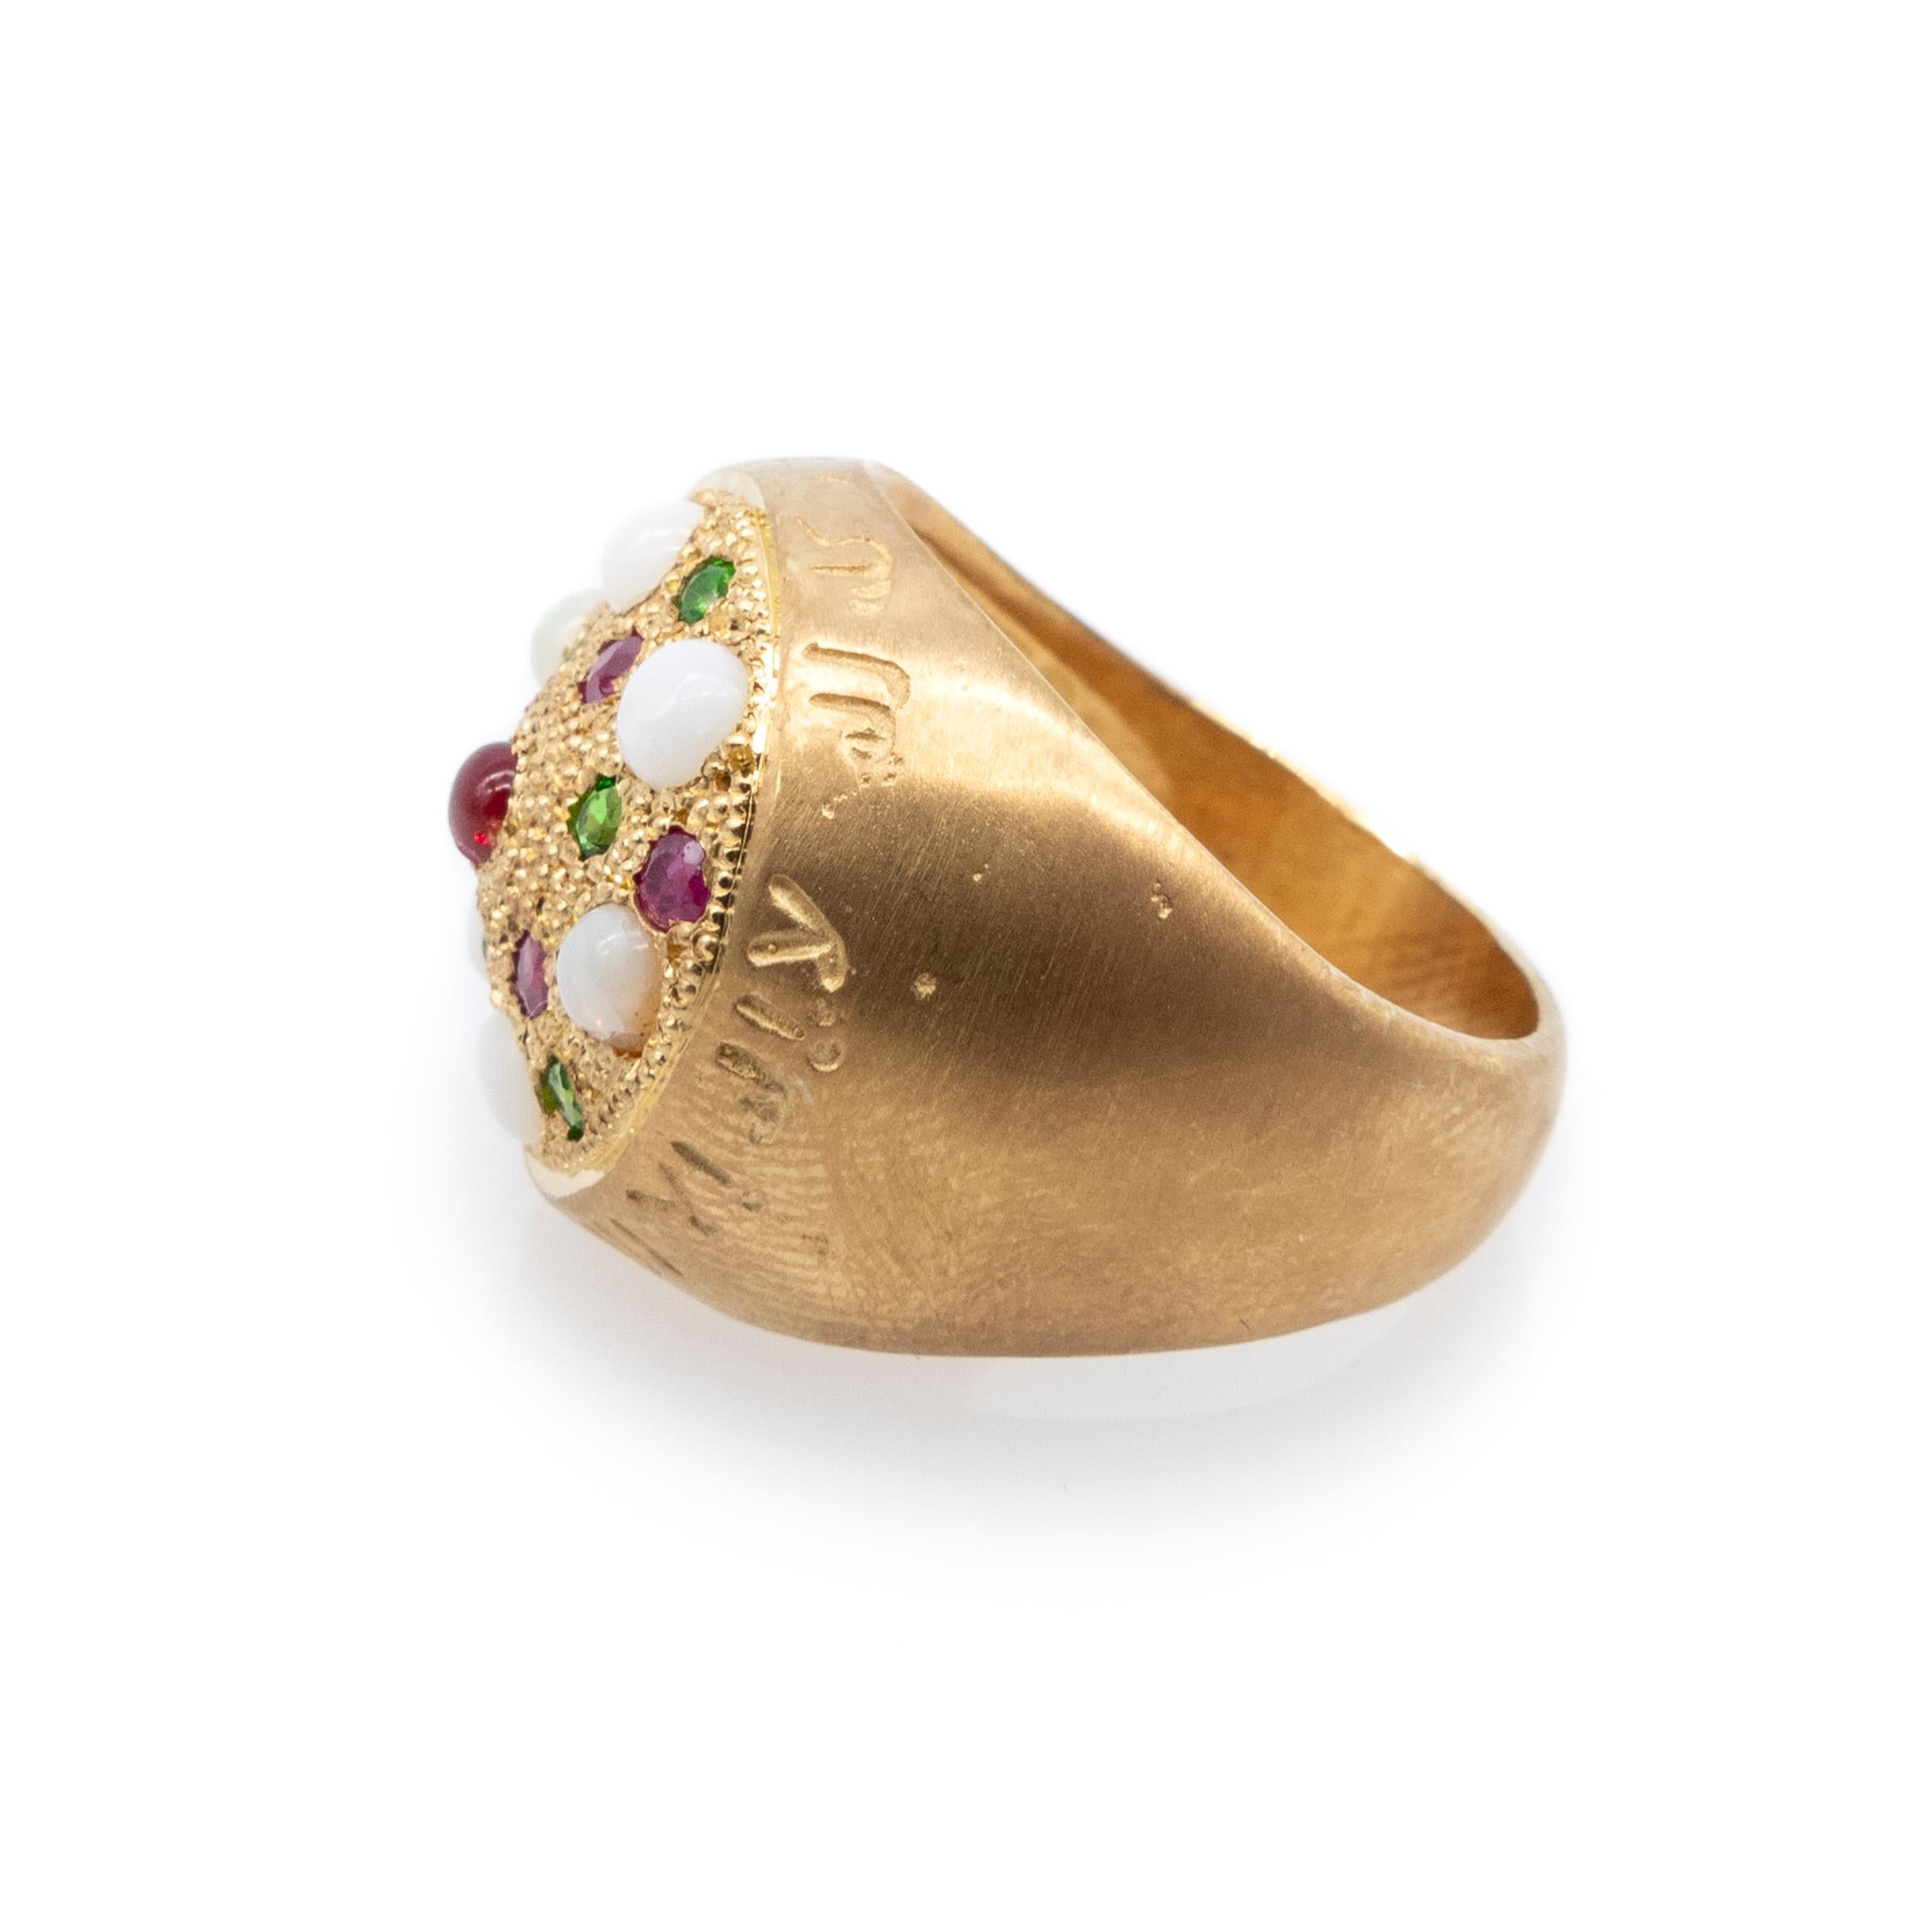 Cabochon Silver Ring Gold Plate White Opals Red Fire Opal Emeralds Rubies Vicente Gracia